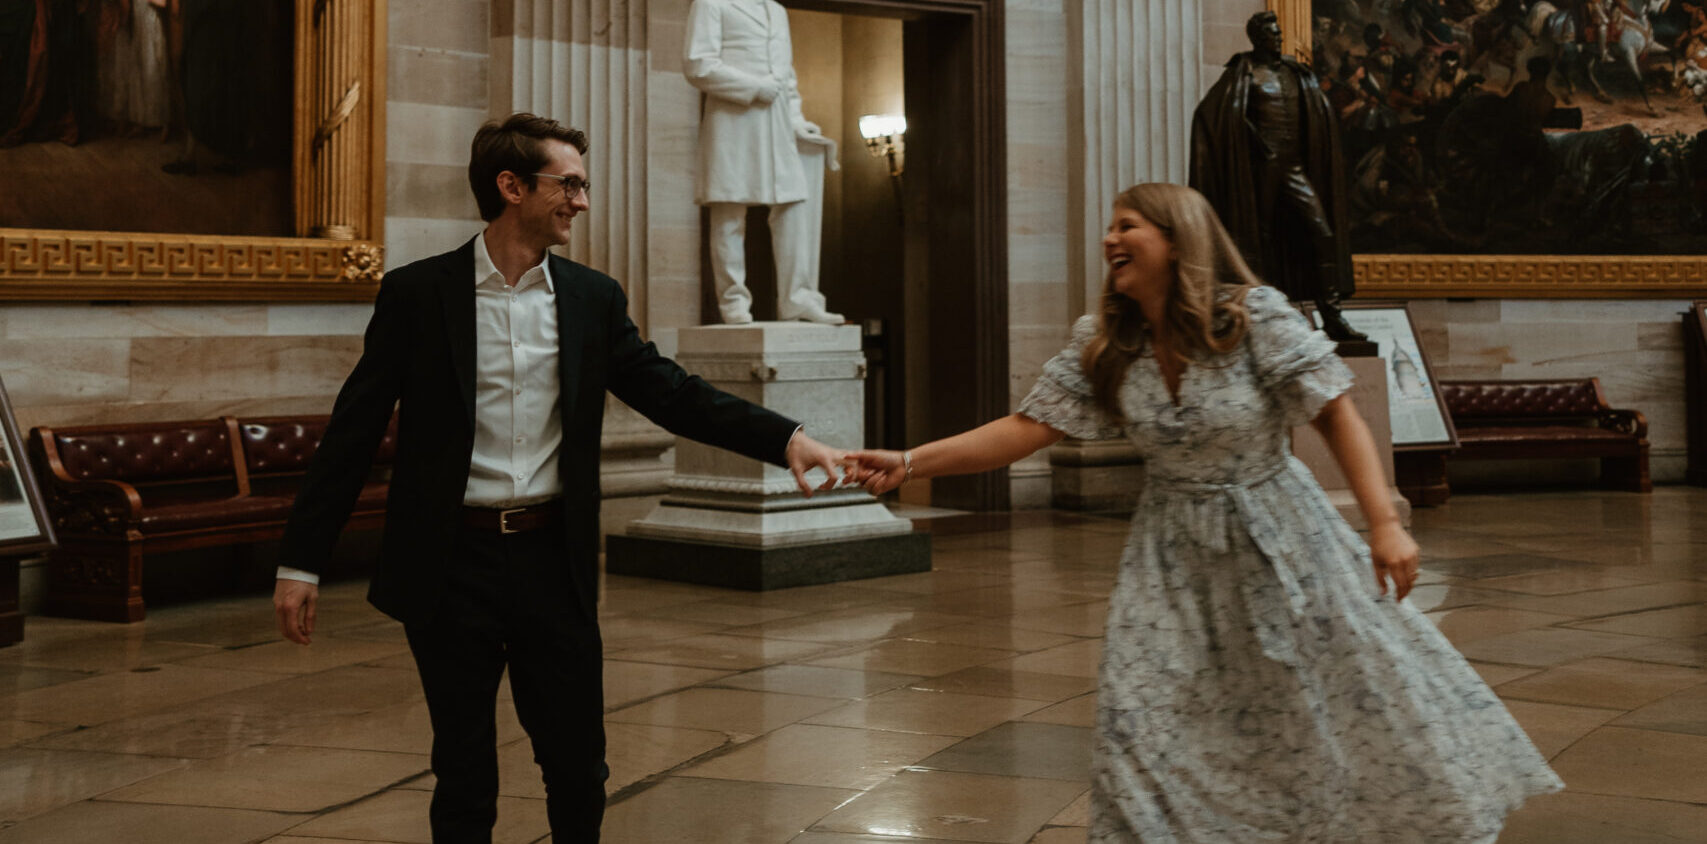 Engagement session in the DC Capitol Building